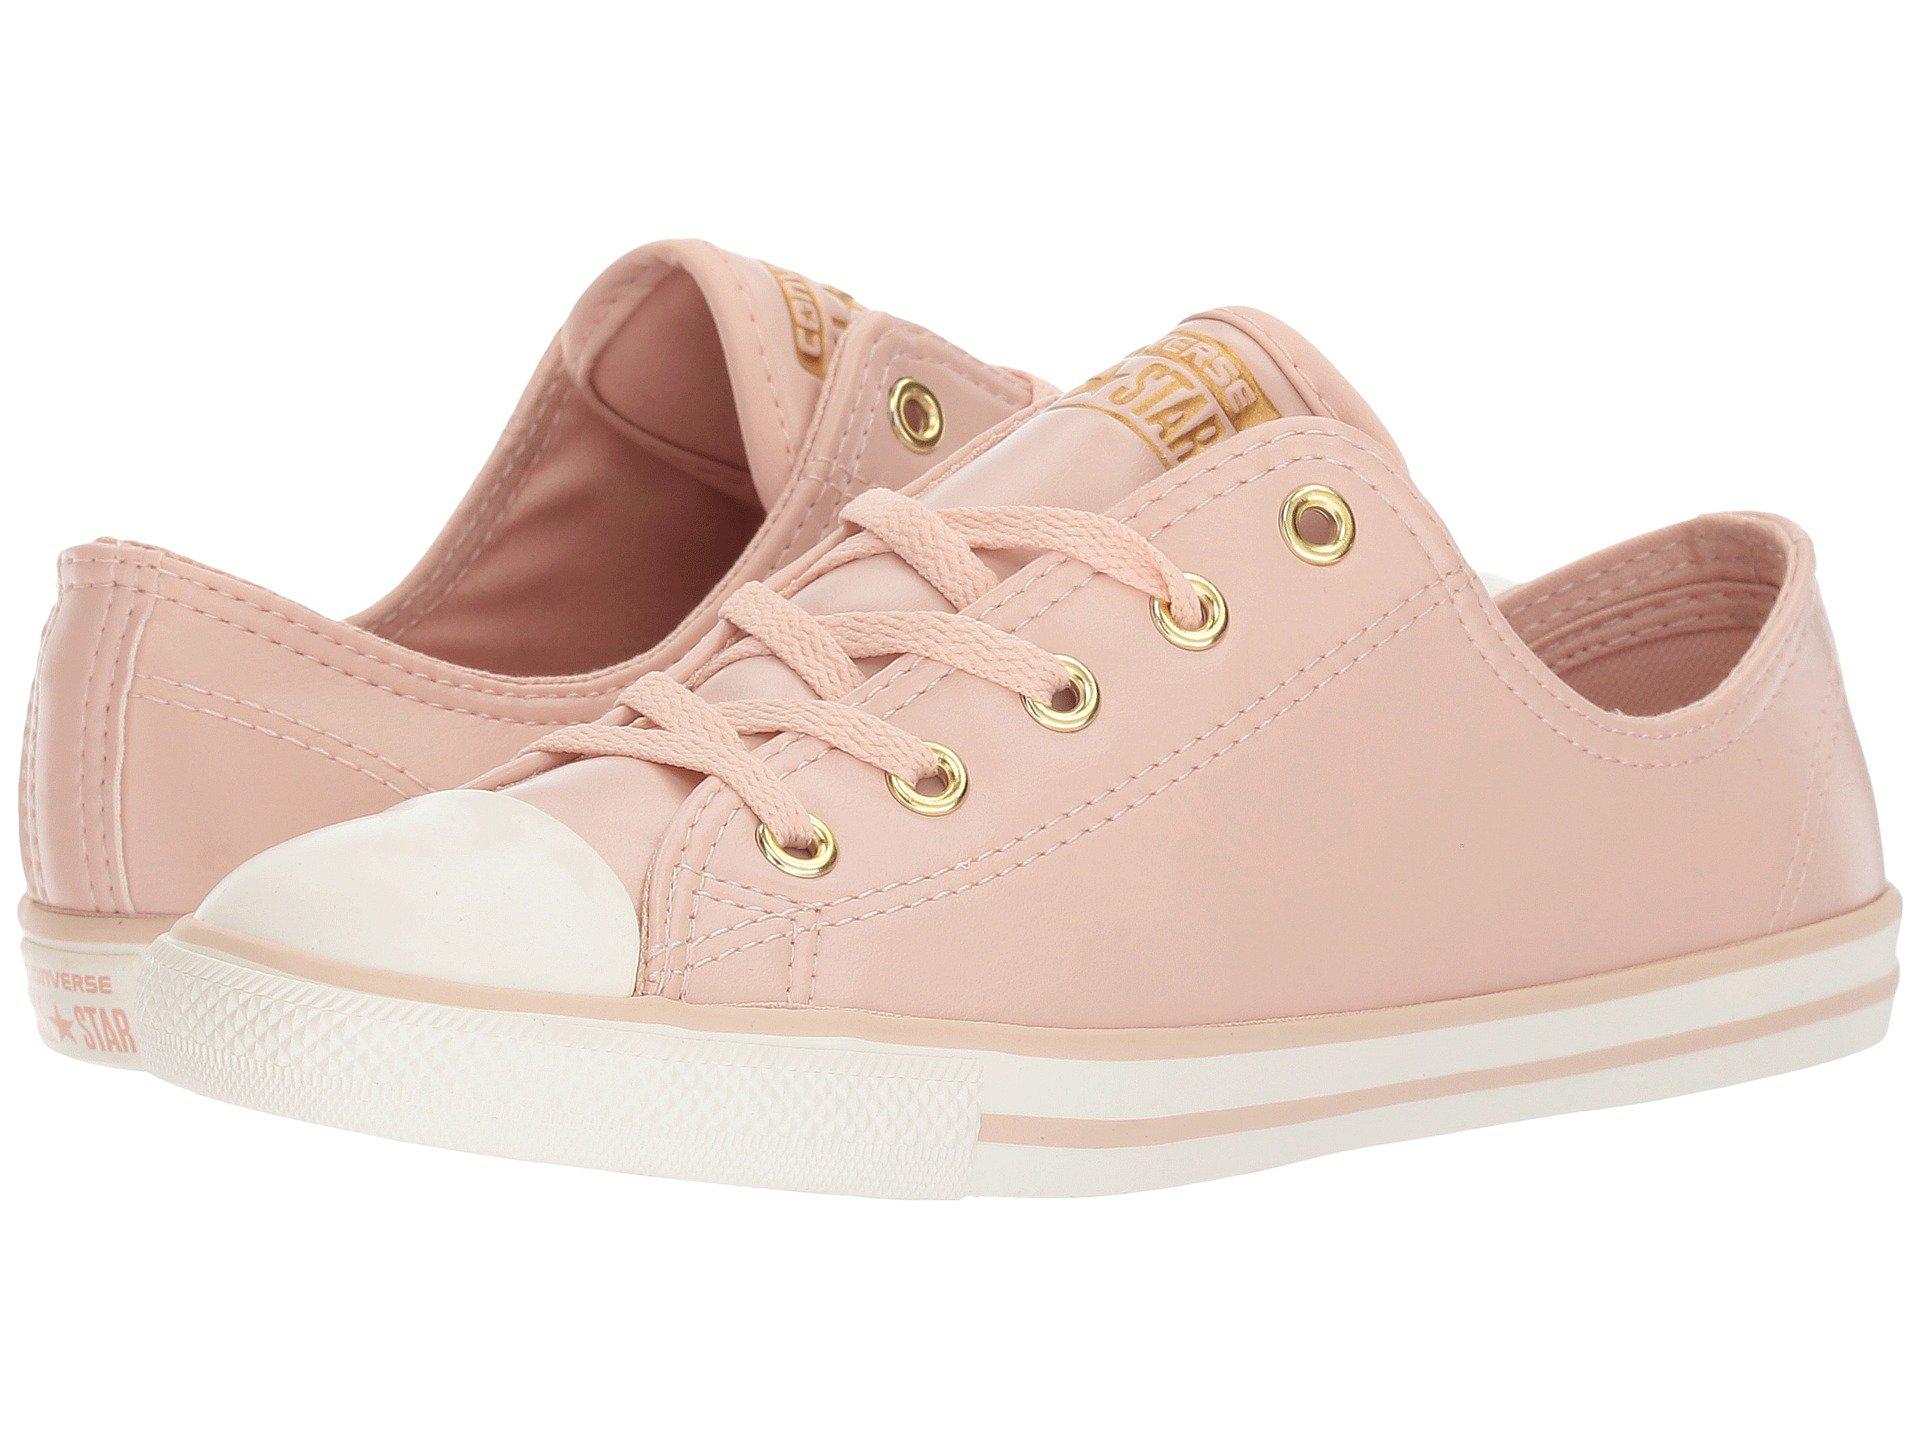 converse all star dainty ox leather